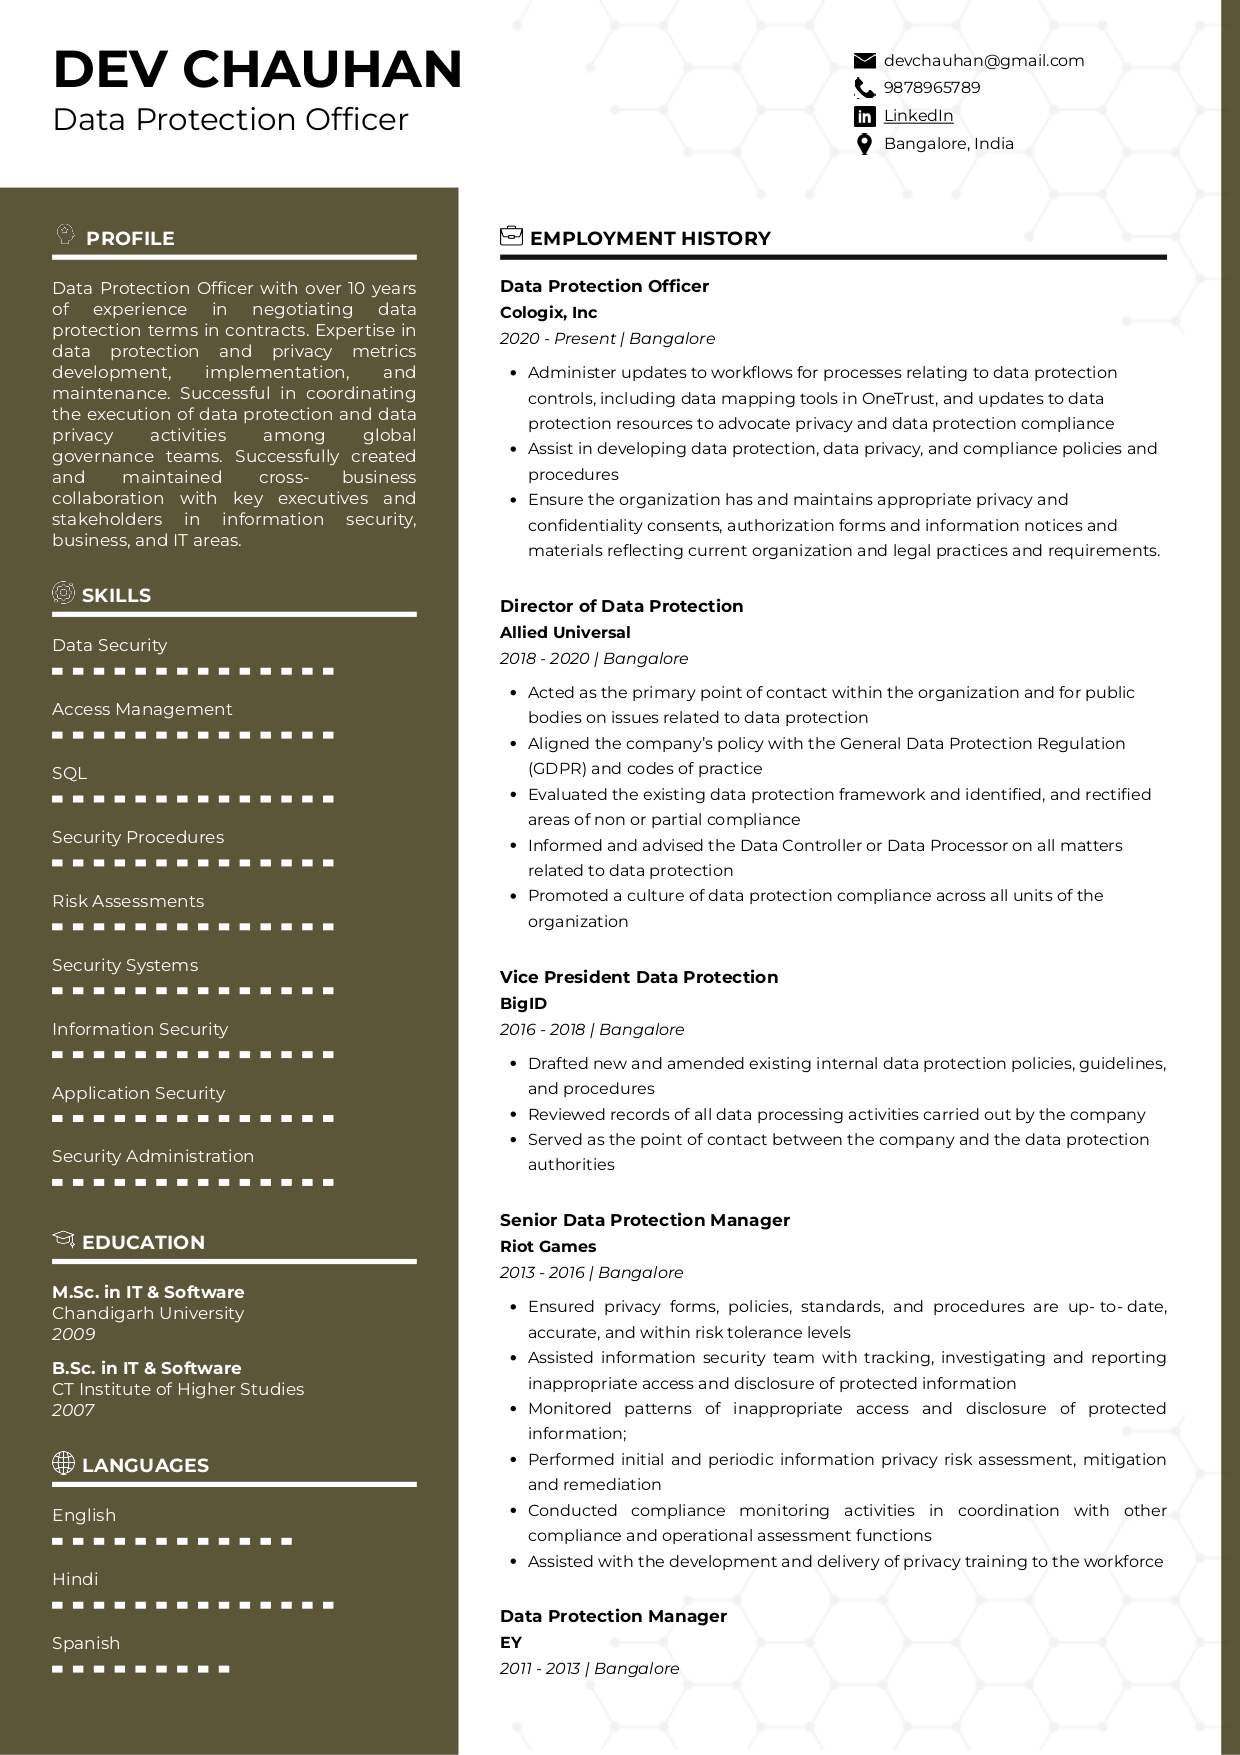 Resume of Data Protection Officer